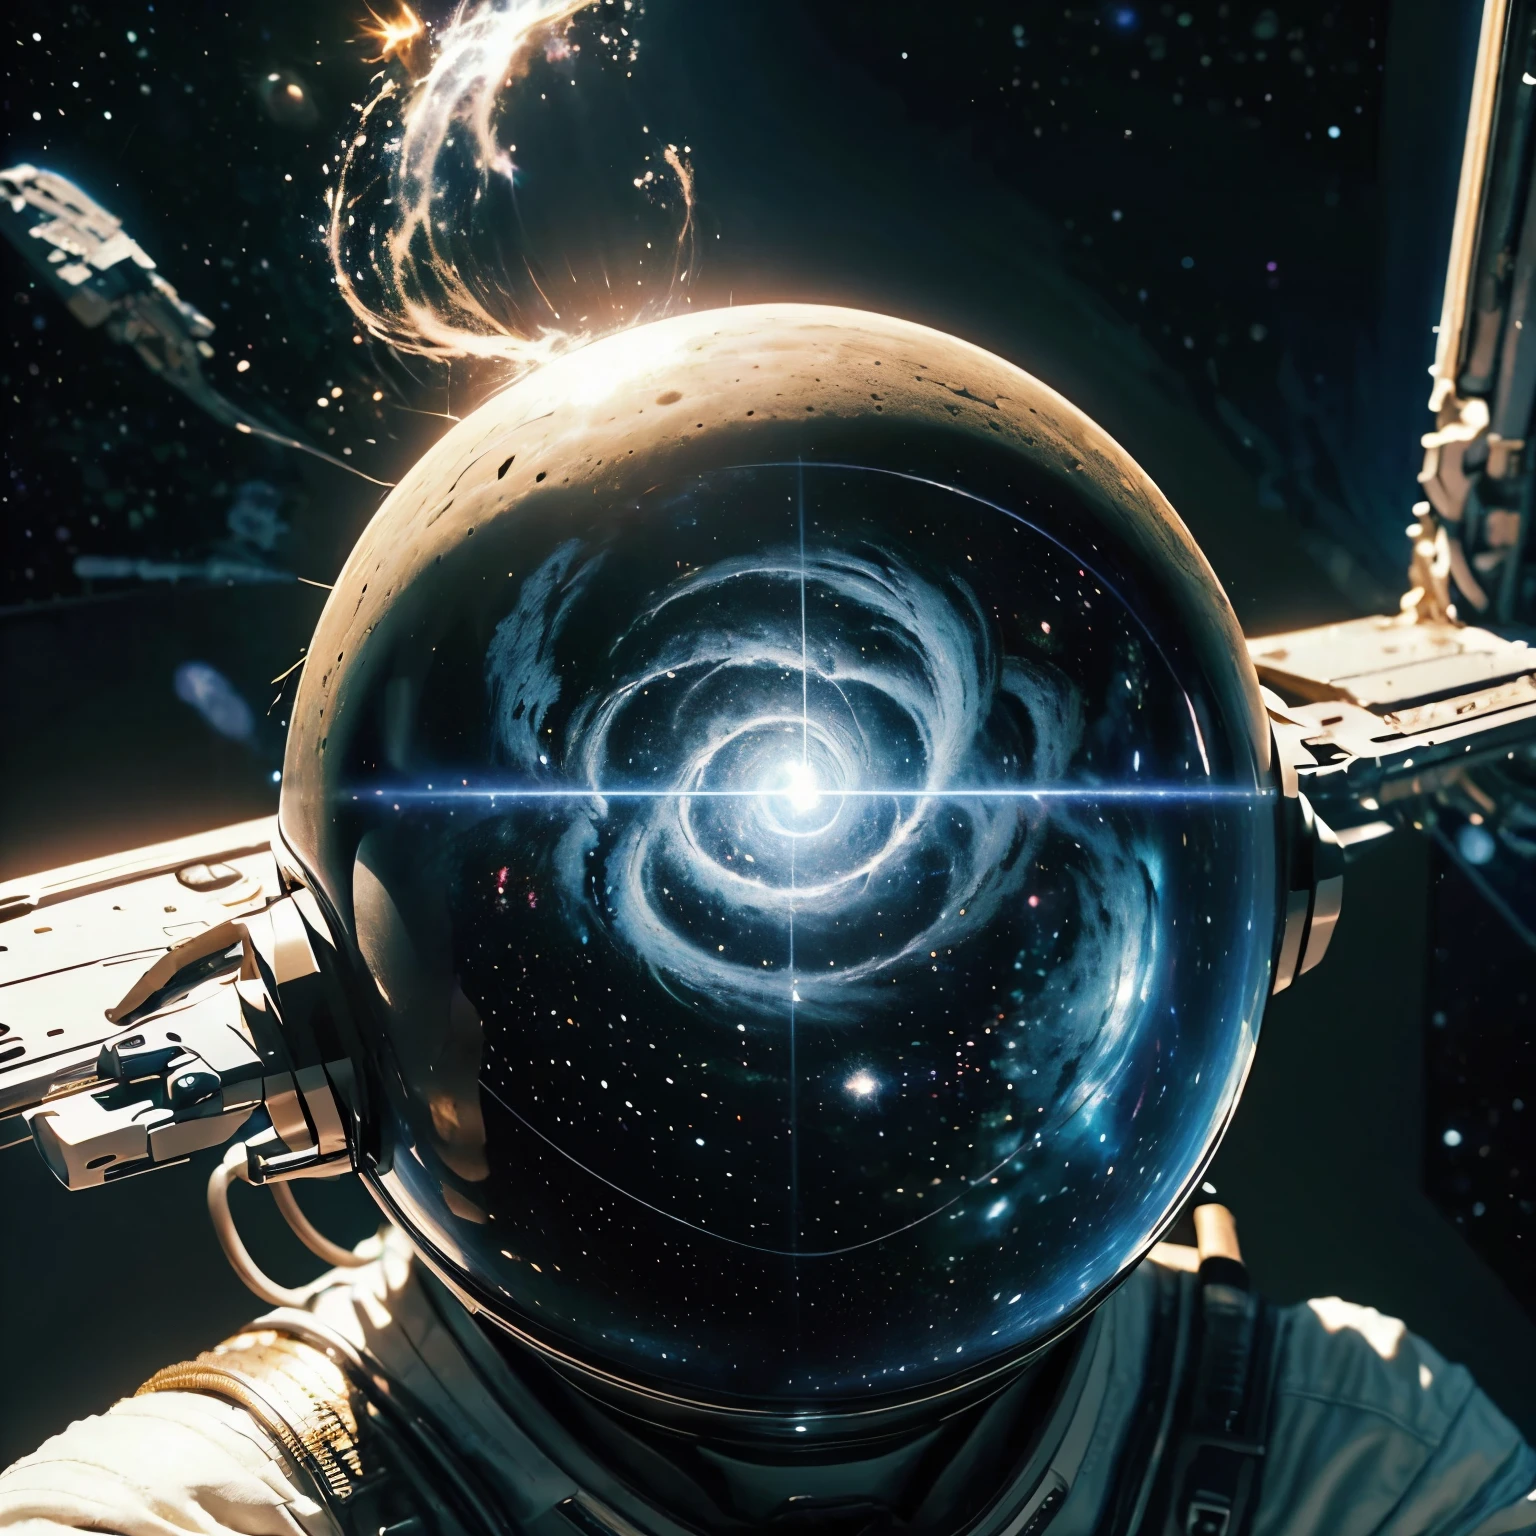 (highest quality、4K、8k、High resolution、masterpiece: 1.2)、Super detailed、(real、photorealistic、photorealistic: 1.37)、portrait、Space Swimming、Astronaut Floating、Exploring the depths of space、Humans in outer space、astronomy 、Adventures among the Milky Way、space exploration、Zero gravity environment、Deep Space Diving、beauttiful starilky Way、nebula、The vast darkness of space、Surreal space landscape、Sparkly astronaut suit、Star reflection on the visor、Immersive Space Experience、The awe-inspiring vastness of the universe、Astronaut admiring the beauty of space、Bent Earth in the background、Celestial Wonders、Passing spaceship、Future Space Technology、peaceful and calm atmosphere、Shining Stardust、Space particles flying around、Clear and vivid celestial colors、Fantastic glow scene、Diverse celestial bodies、Pulsating Cosmic Energy、Cosmic rays create fascinating light effects、Interstellar creature observing astronauts、A humble perspective of our place in the universe、A bright constellation guiding the way、A cosmic symphony of sights and sounds、